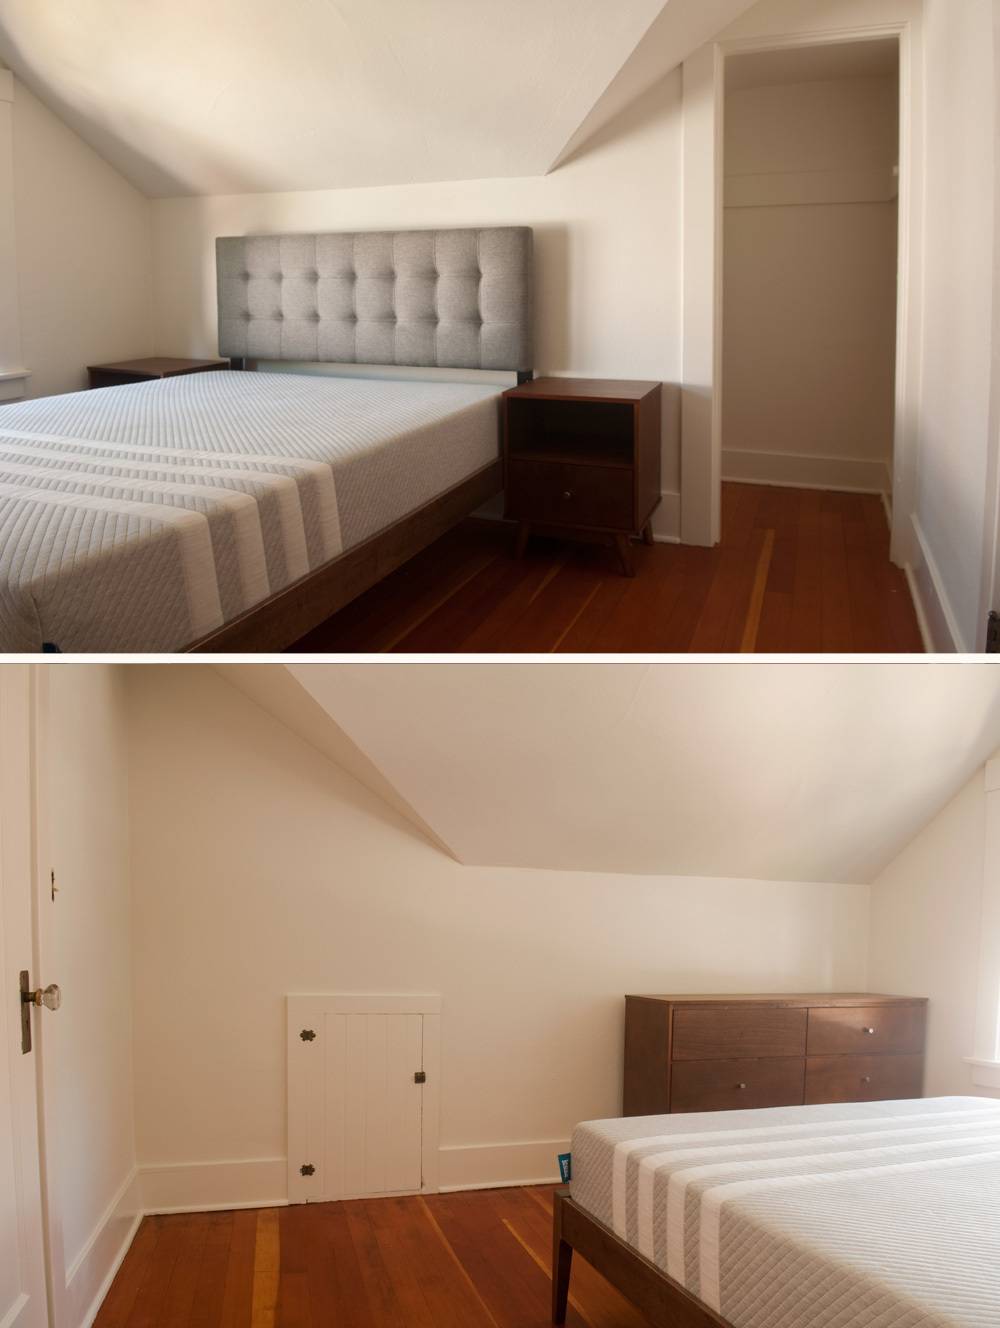 A bedroom has white walls and a twin size bed with wood flooring.